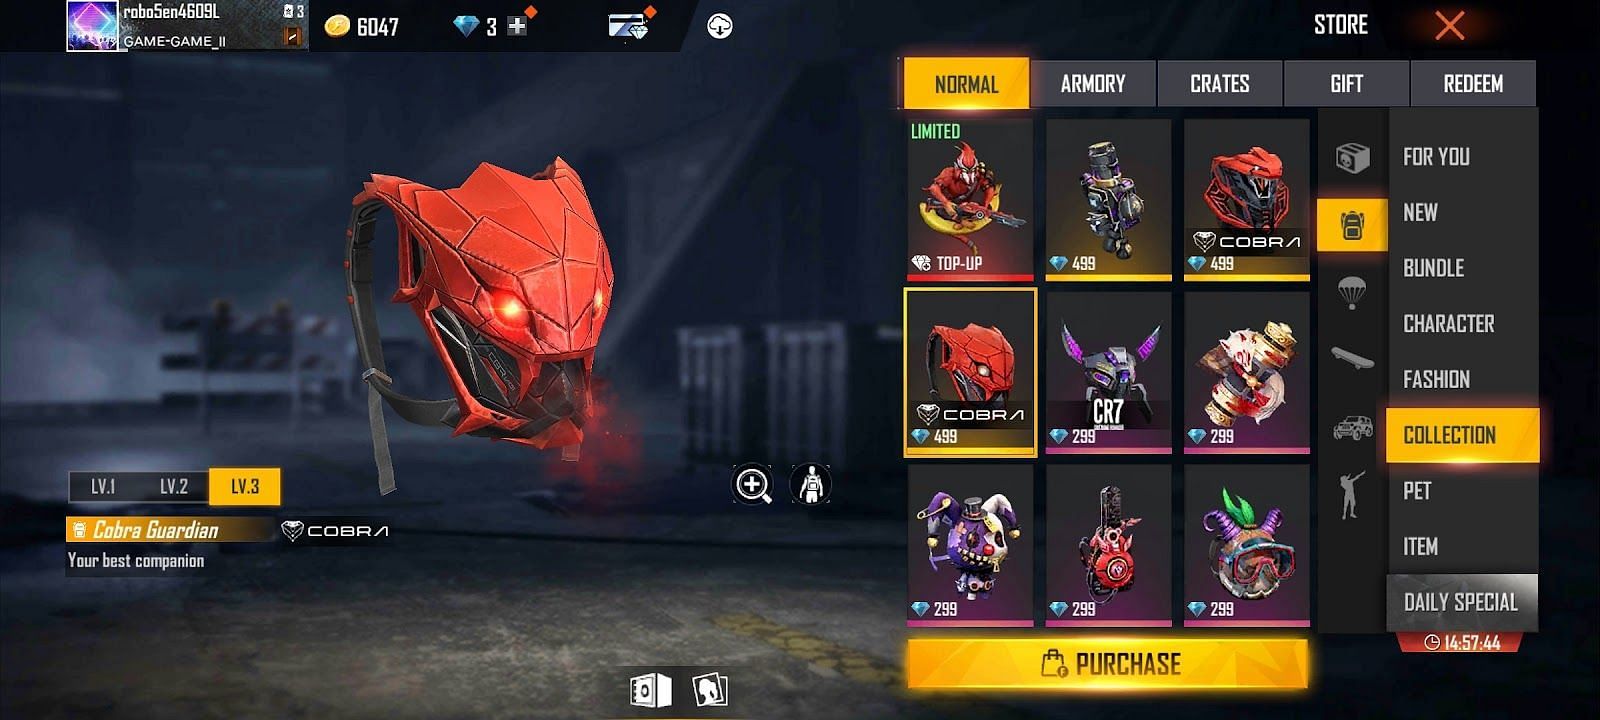 Cobra Guardian backpack is available in the Store (Image via Garena Free Fire)